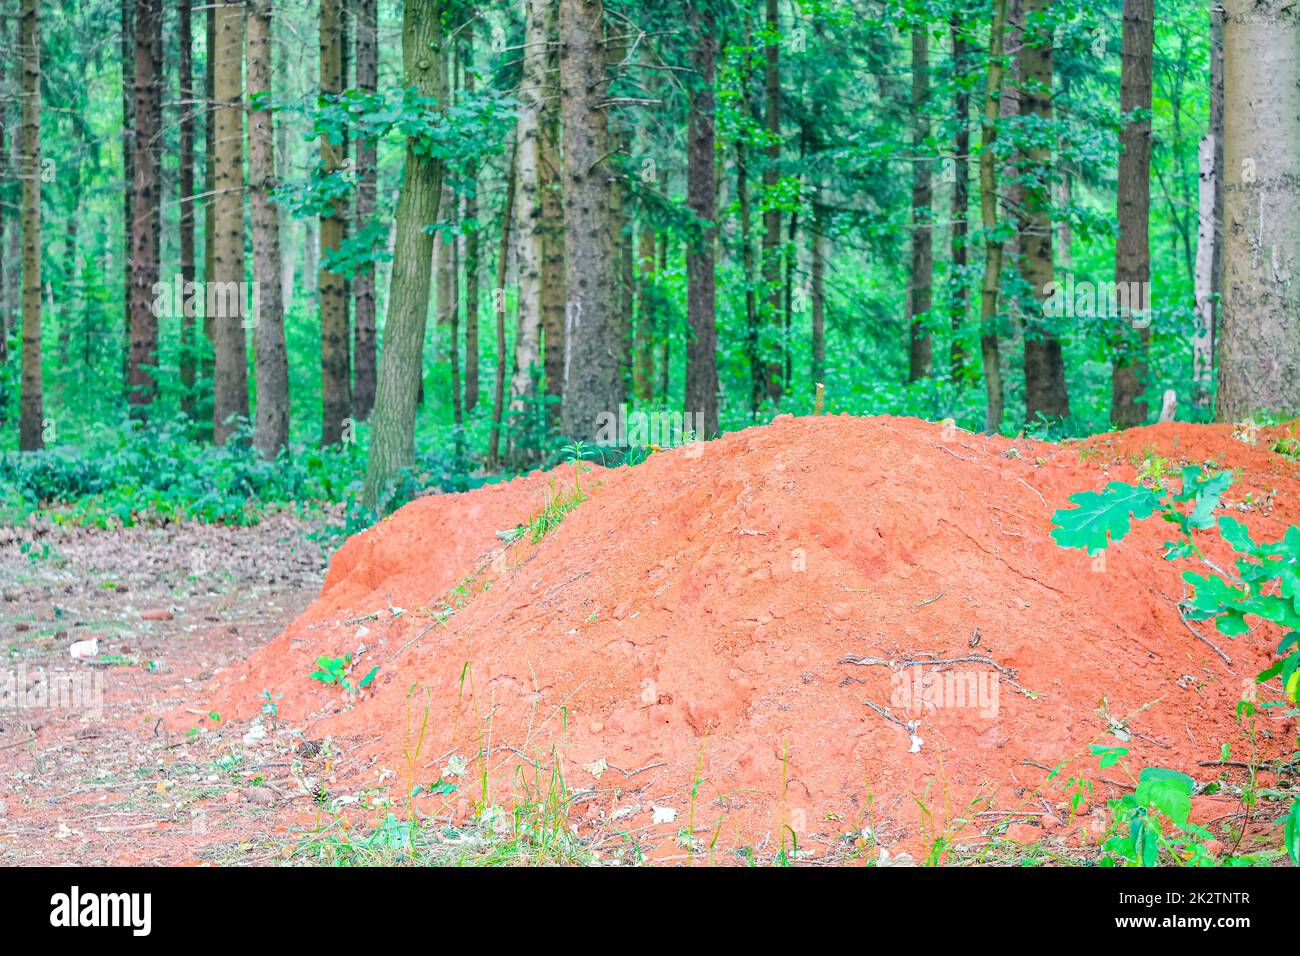 Red clay soil with pathway green plants trees forest Germany. Stock Photo